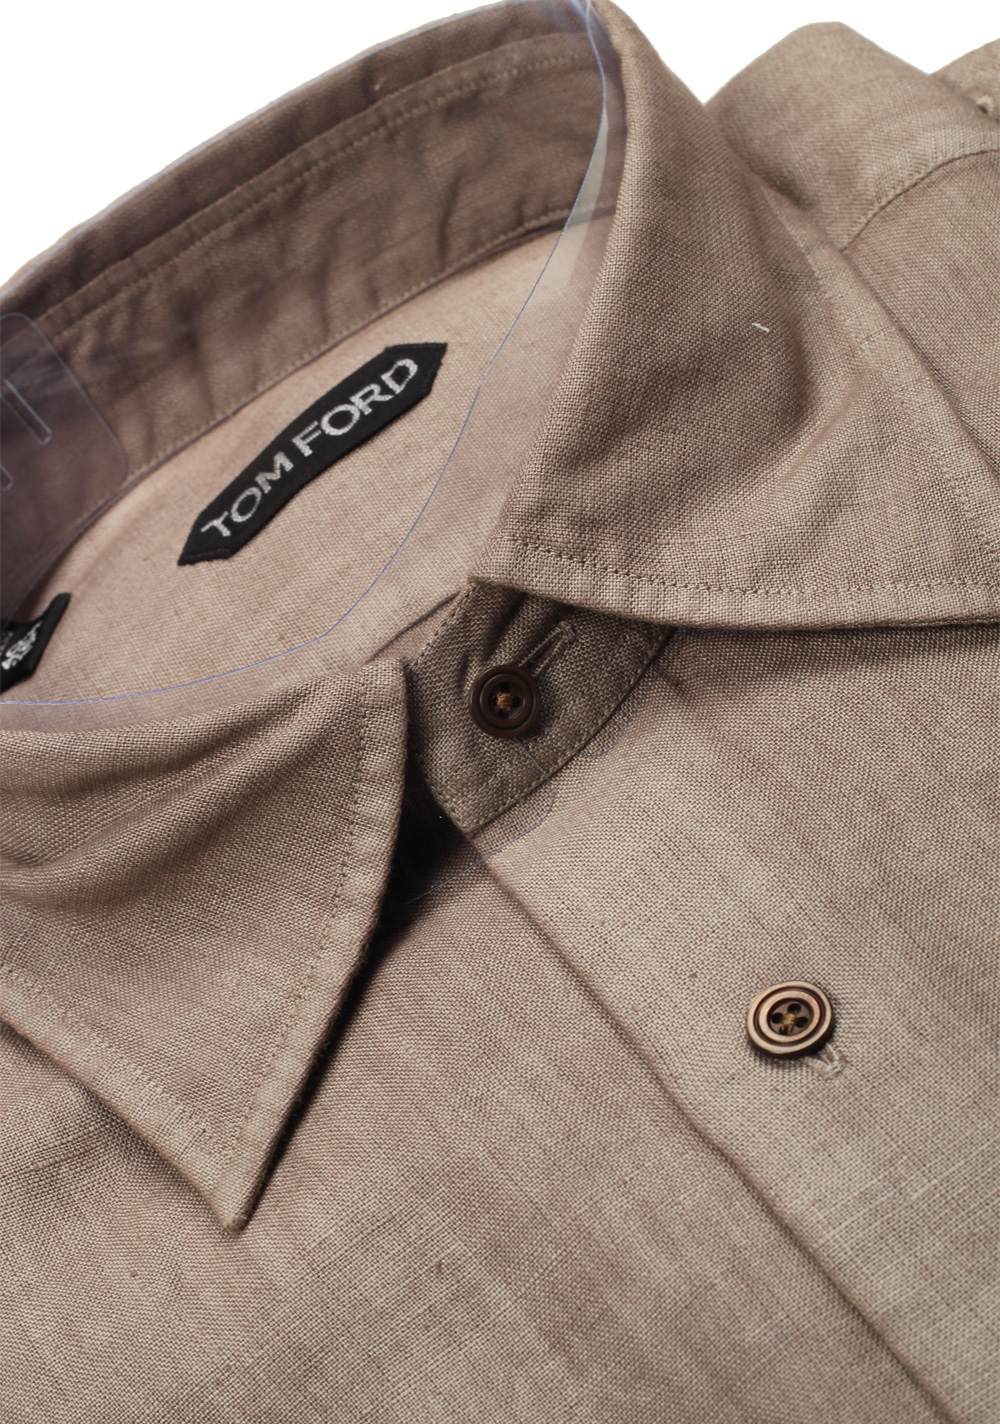 TOM FORD Solid Brown Casual Shirt Size 40 / 15,75 U.S. | Costume Limité